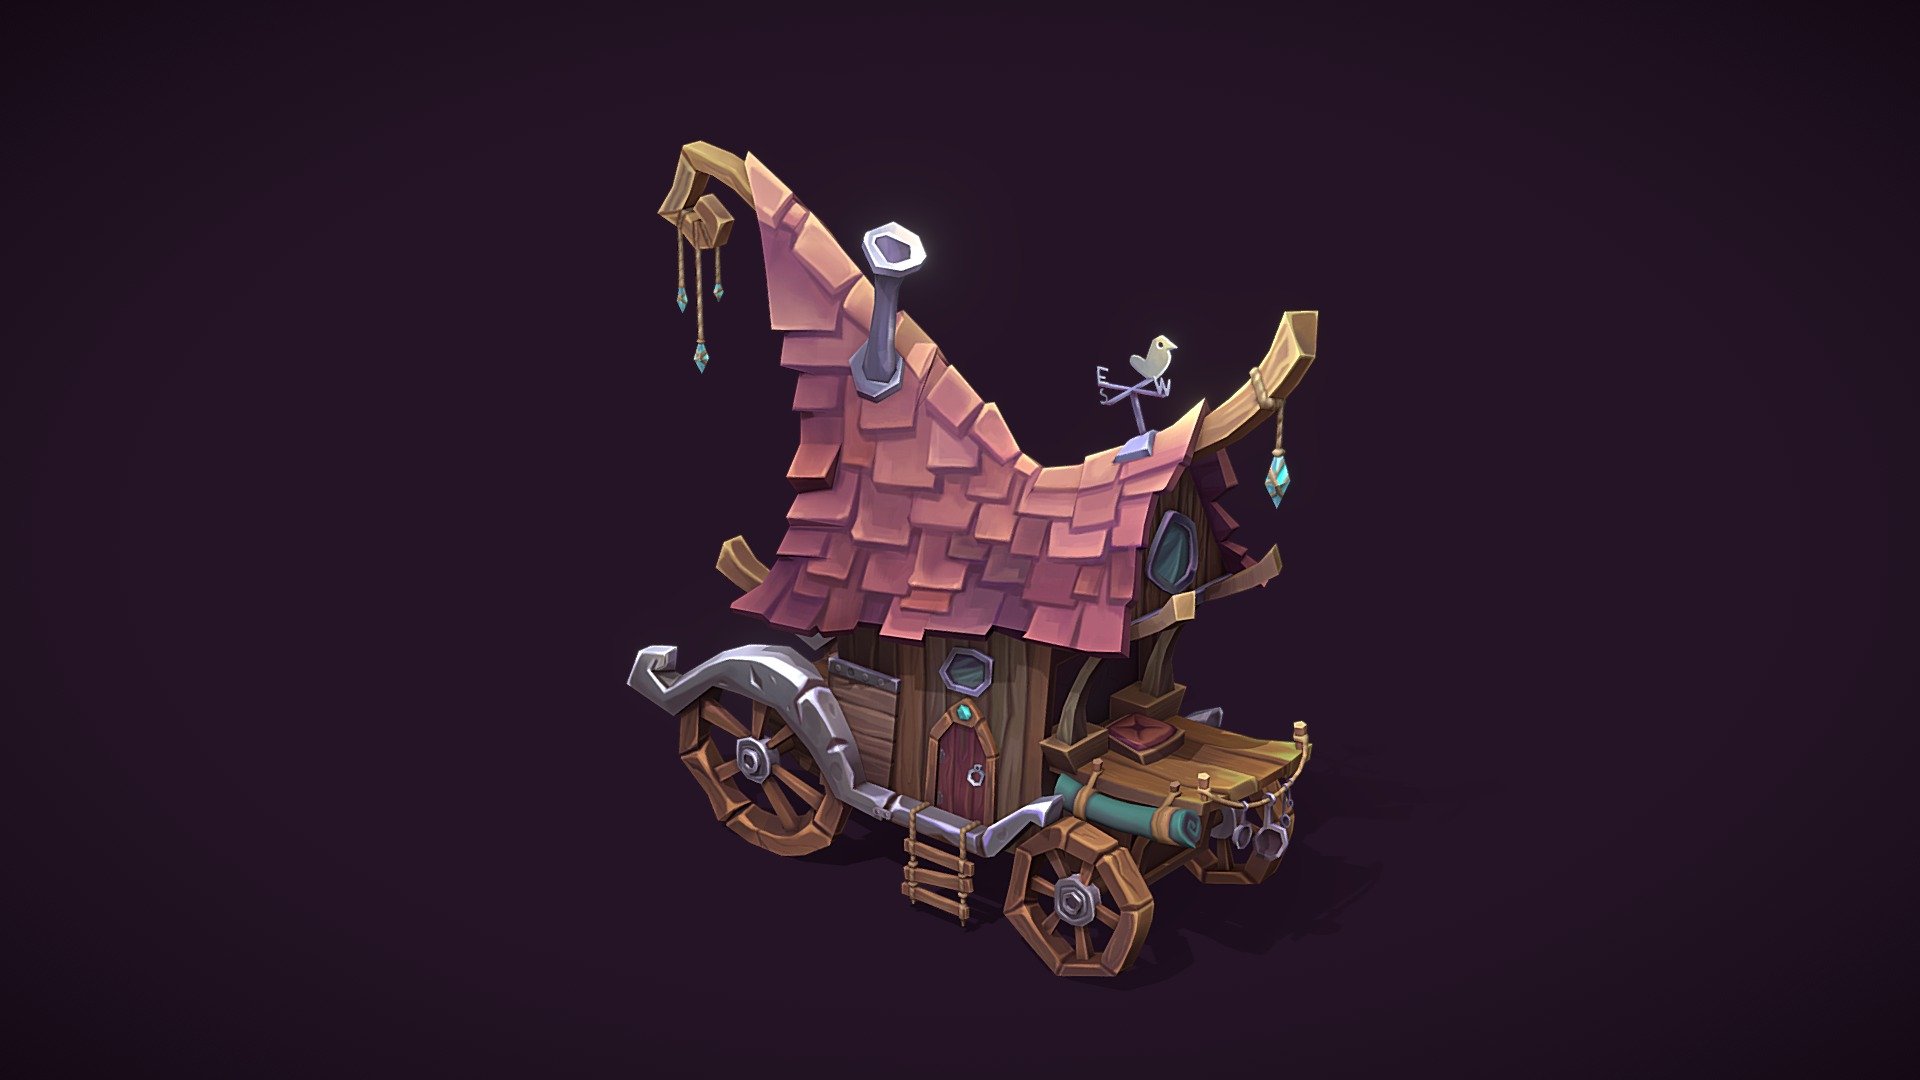 This is my personal project based on concept of Maeve https://www.artstation.com/drawmaevedraw
I started with low-poly model in Blender, then did handpaint texturing in Blender and 3DCoat - Stylized wagon - Download Free 3D model by Irina Kostina (@irinakostina) 3d model